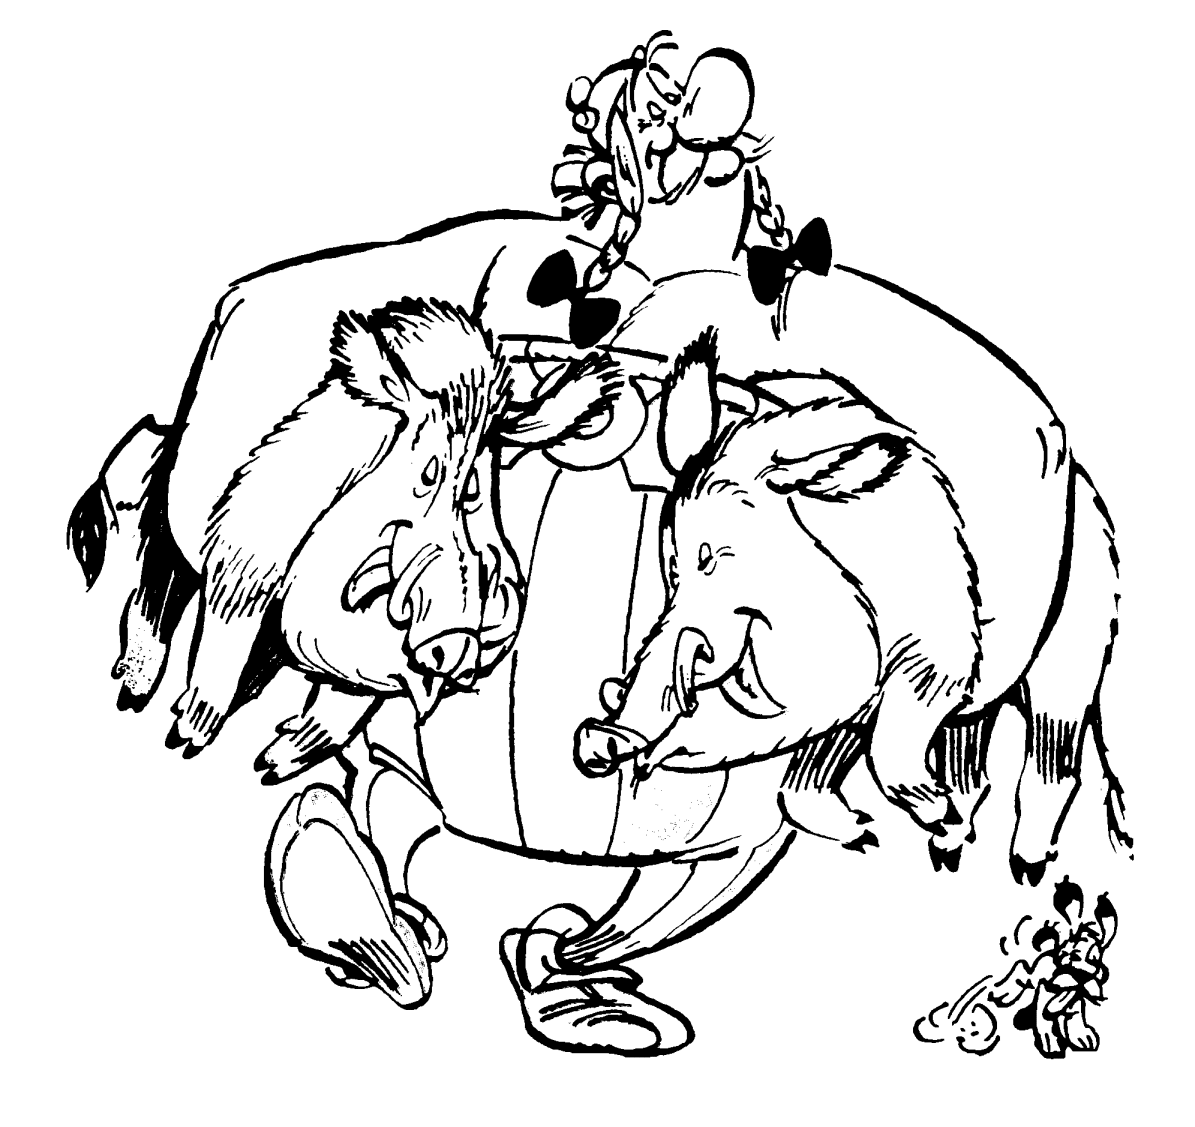 Asterix and Obelix Coloring Pages Cartoons asterix und obelix Printable 2020 0694 Coloring4free